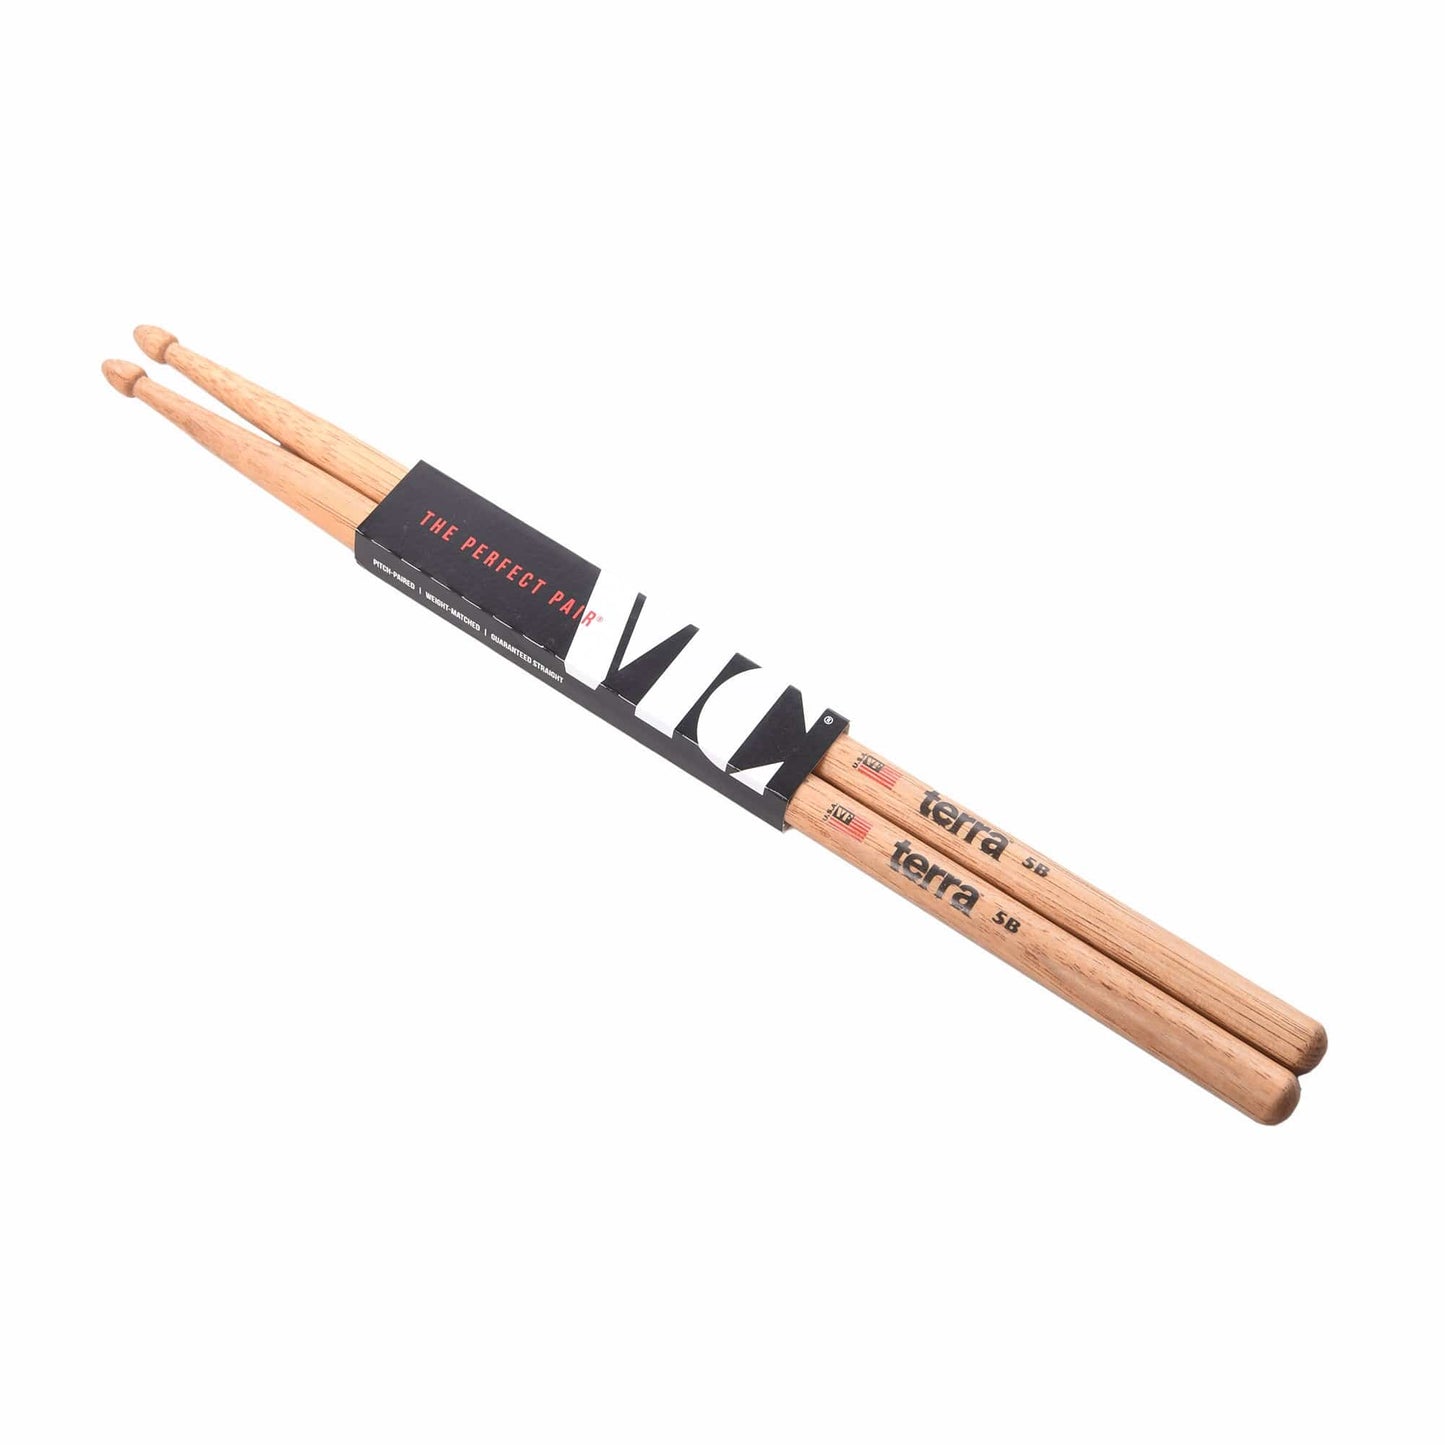 Vic Firth American Classic 5BT Terra Wood Tip Drum Sticks Drums and Percussion / Parts and Accessories / Drum Sticks and Mallets